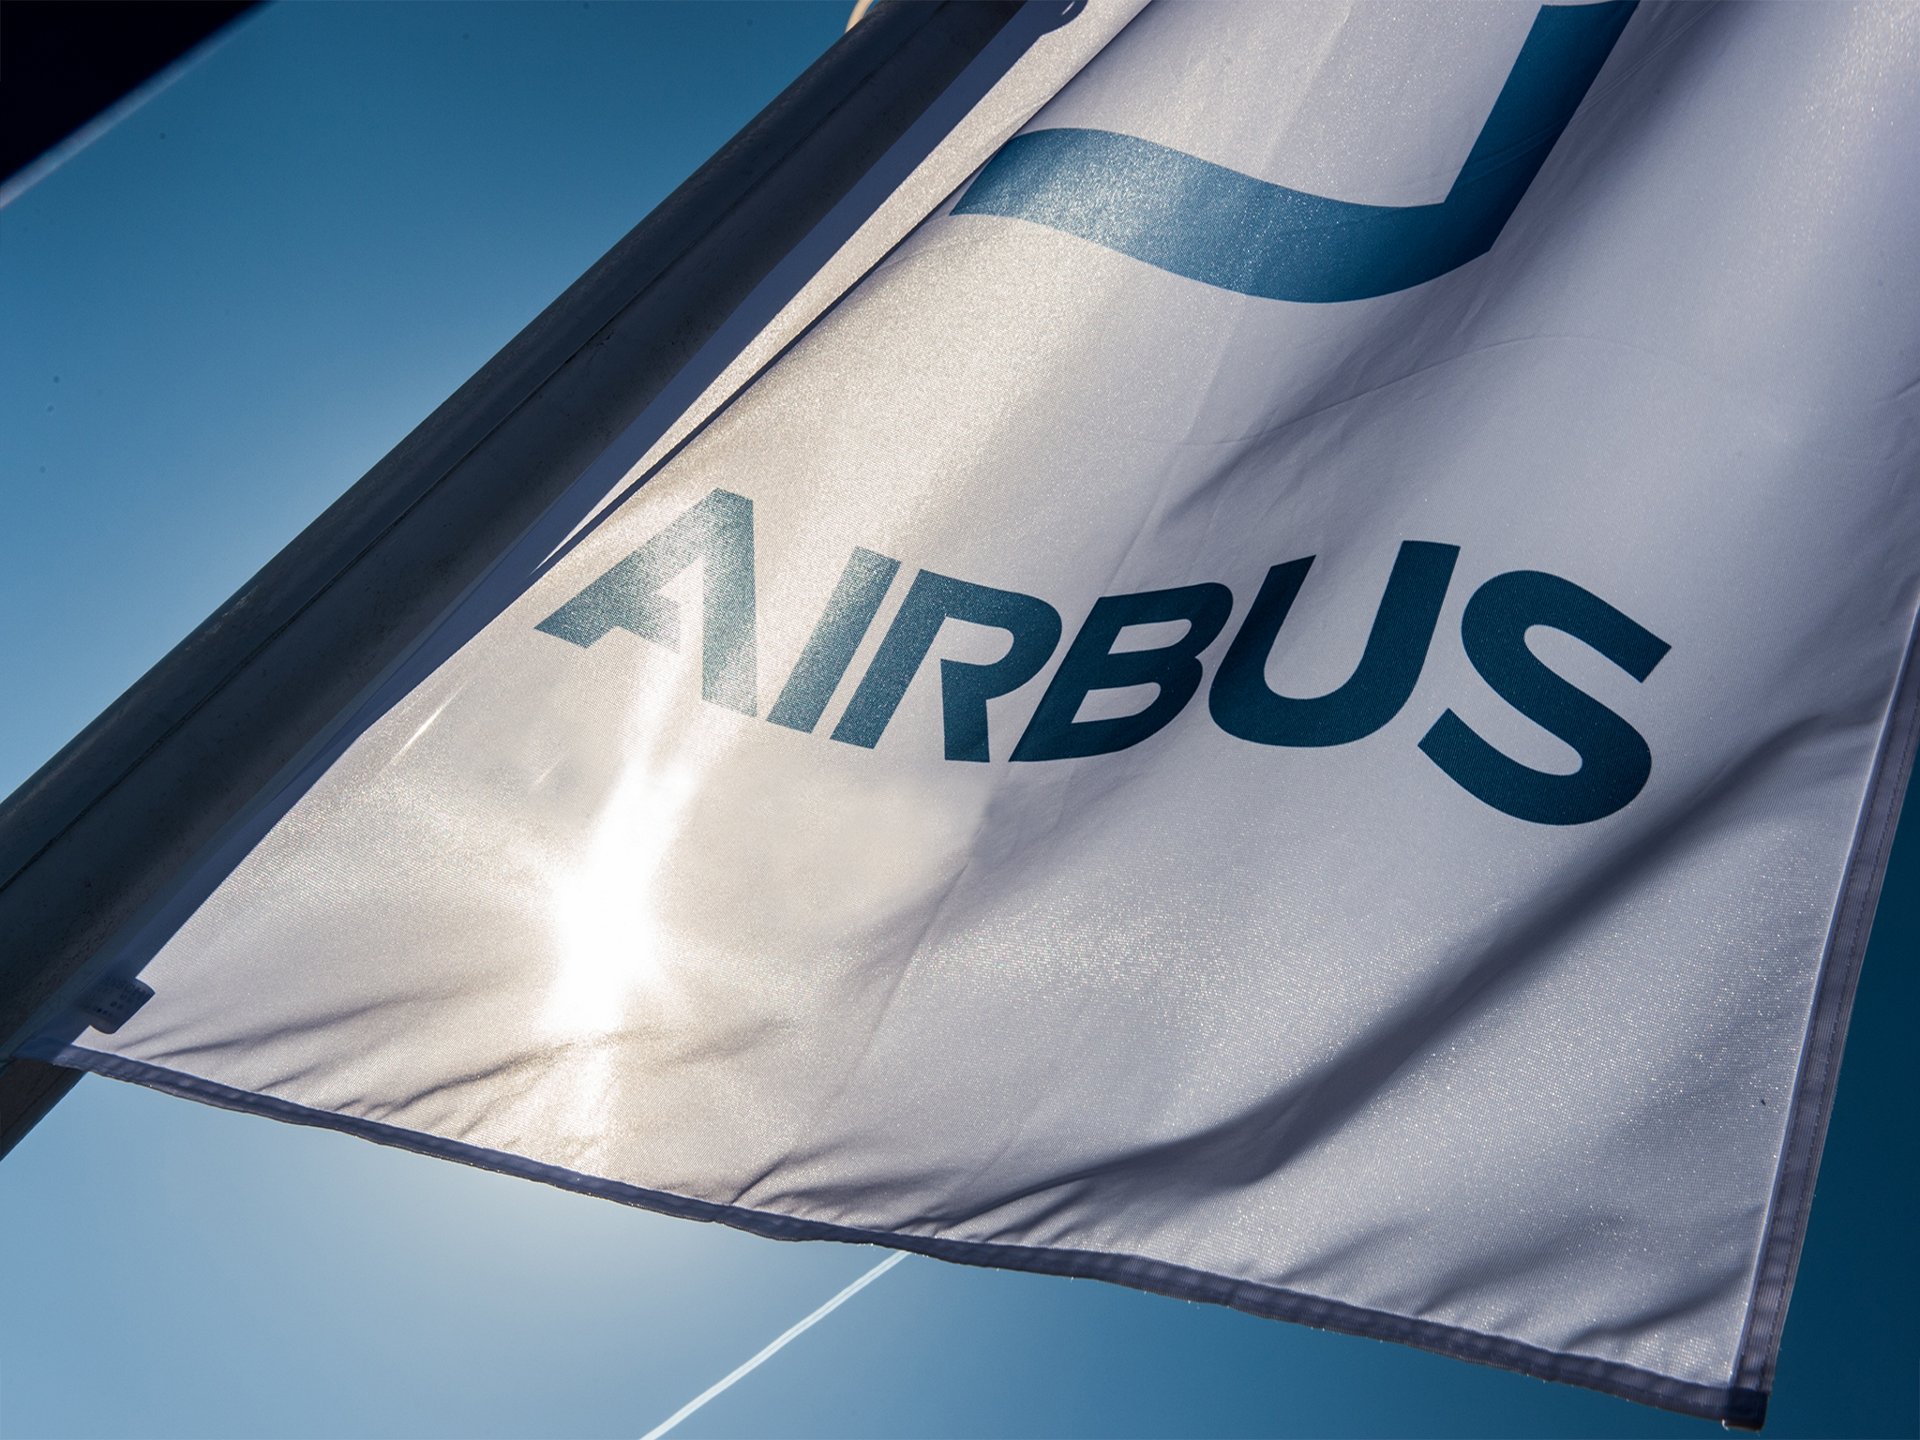 Airbus reports strong 2021 full-year results